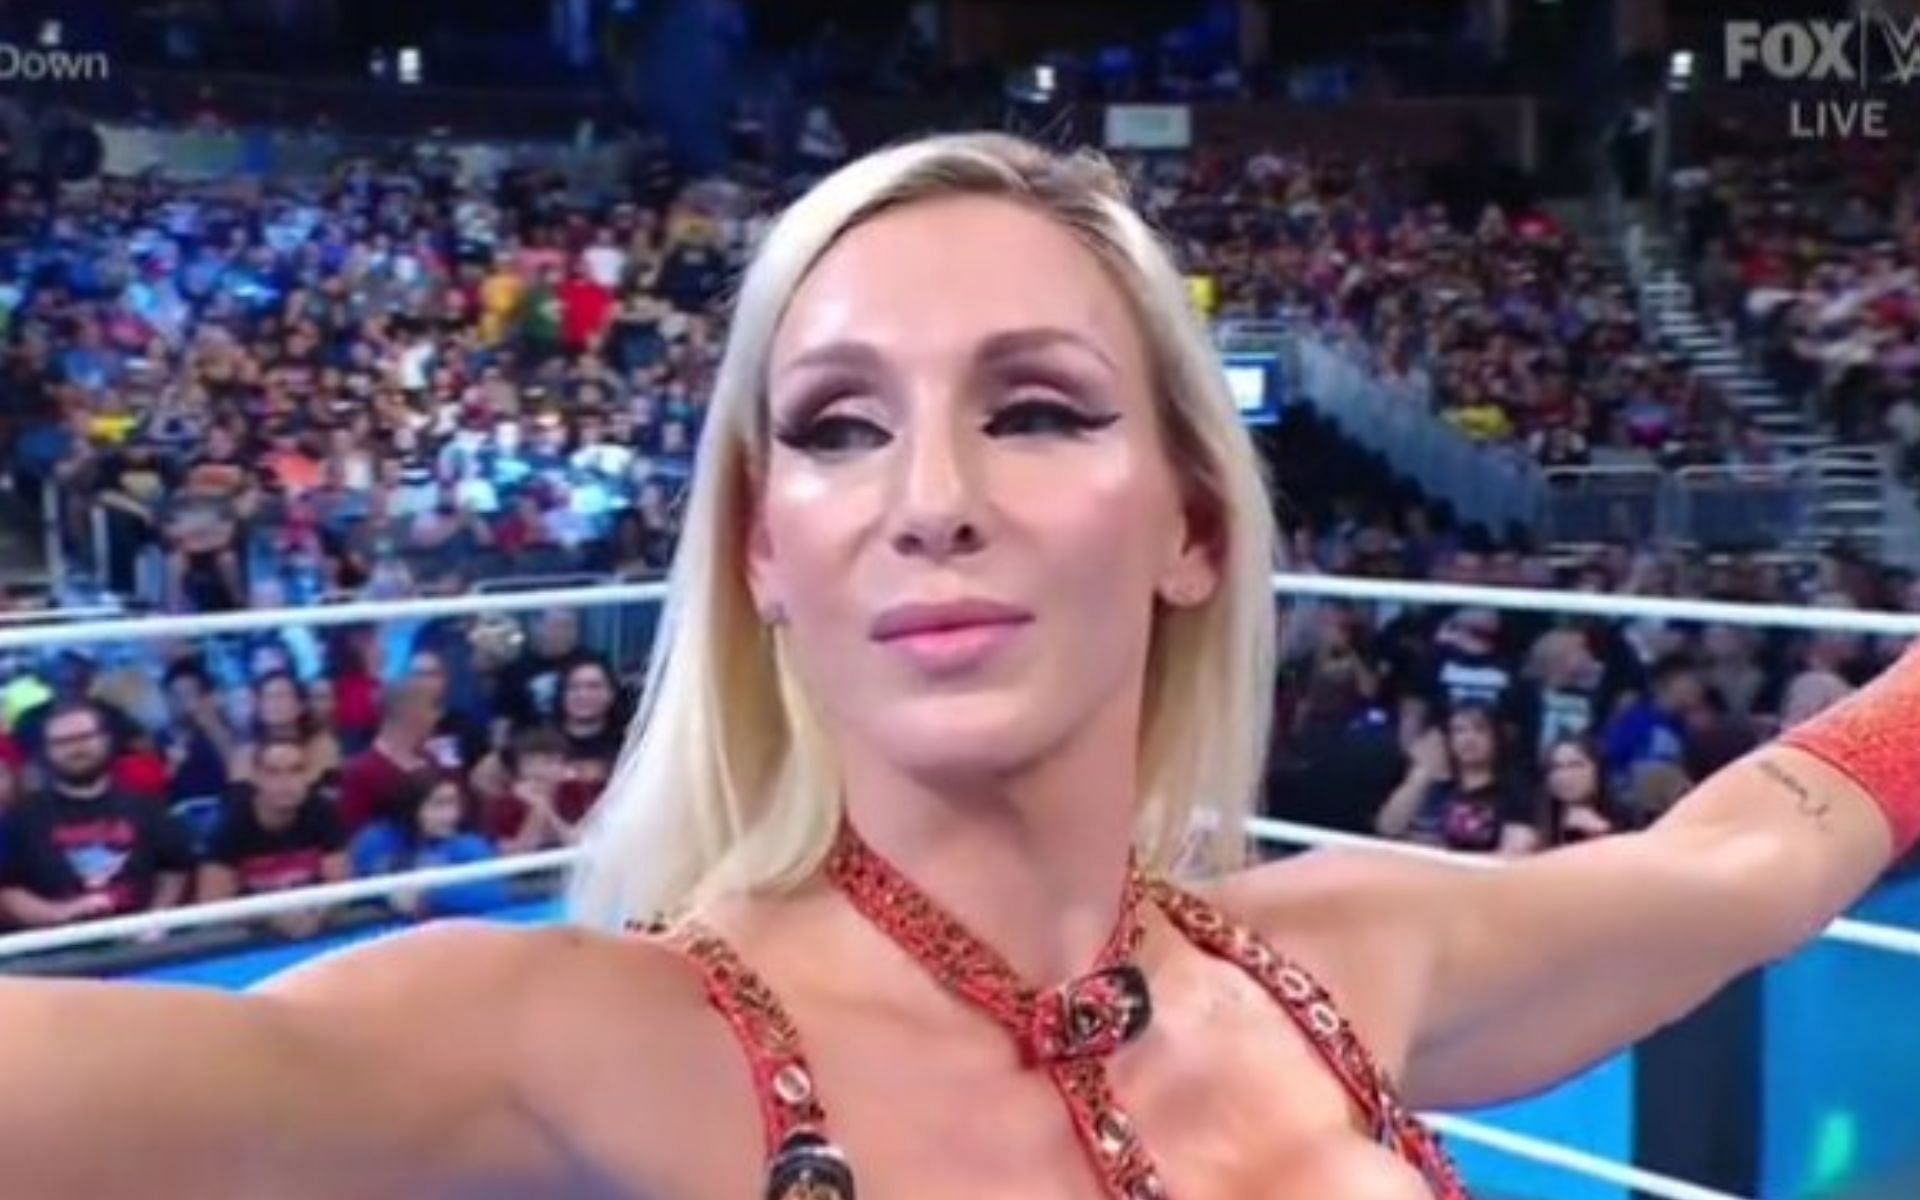 The Queen went up against Iyo Sky on SmackDown